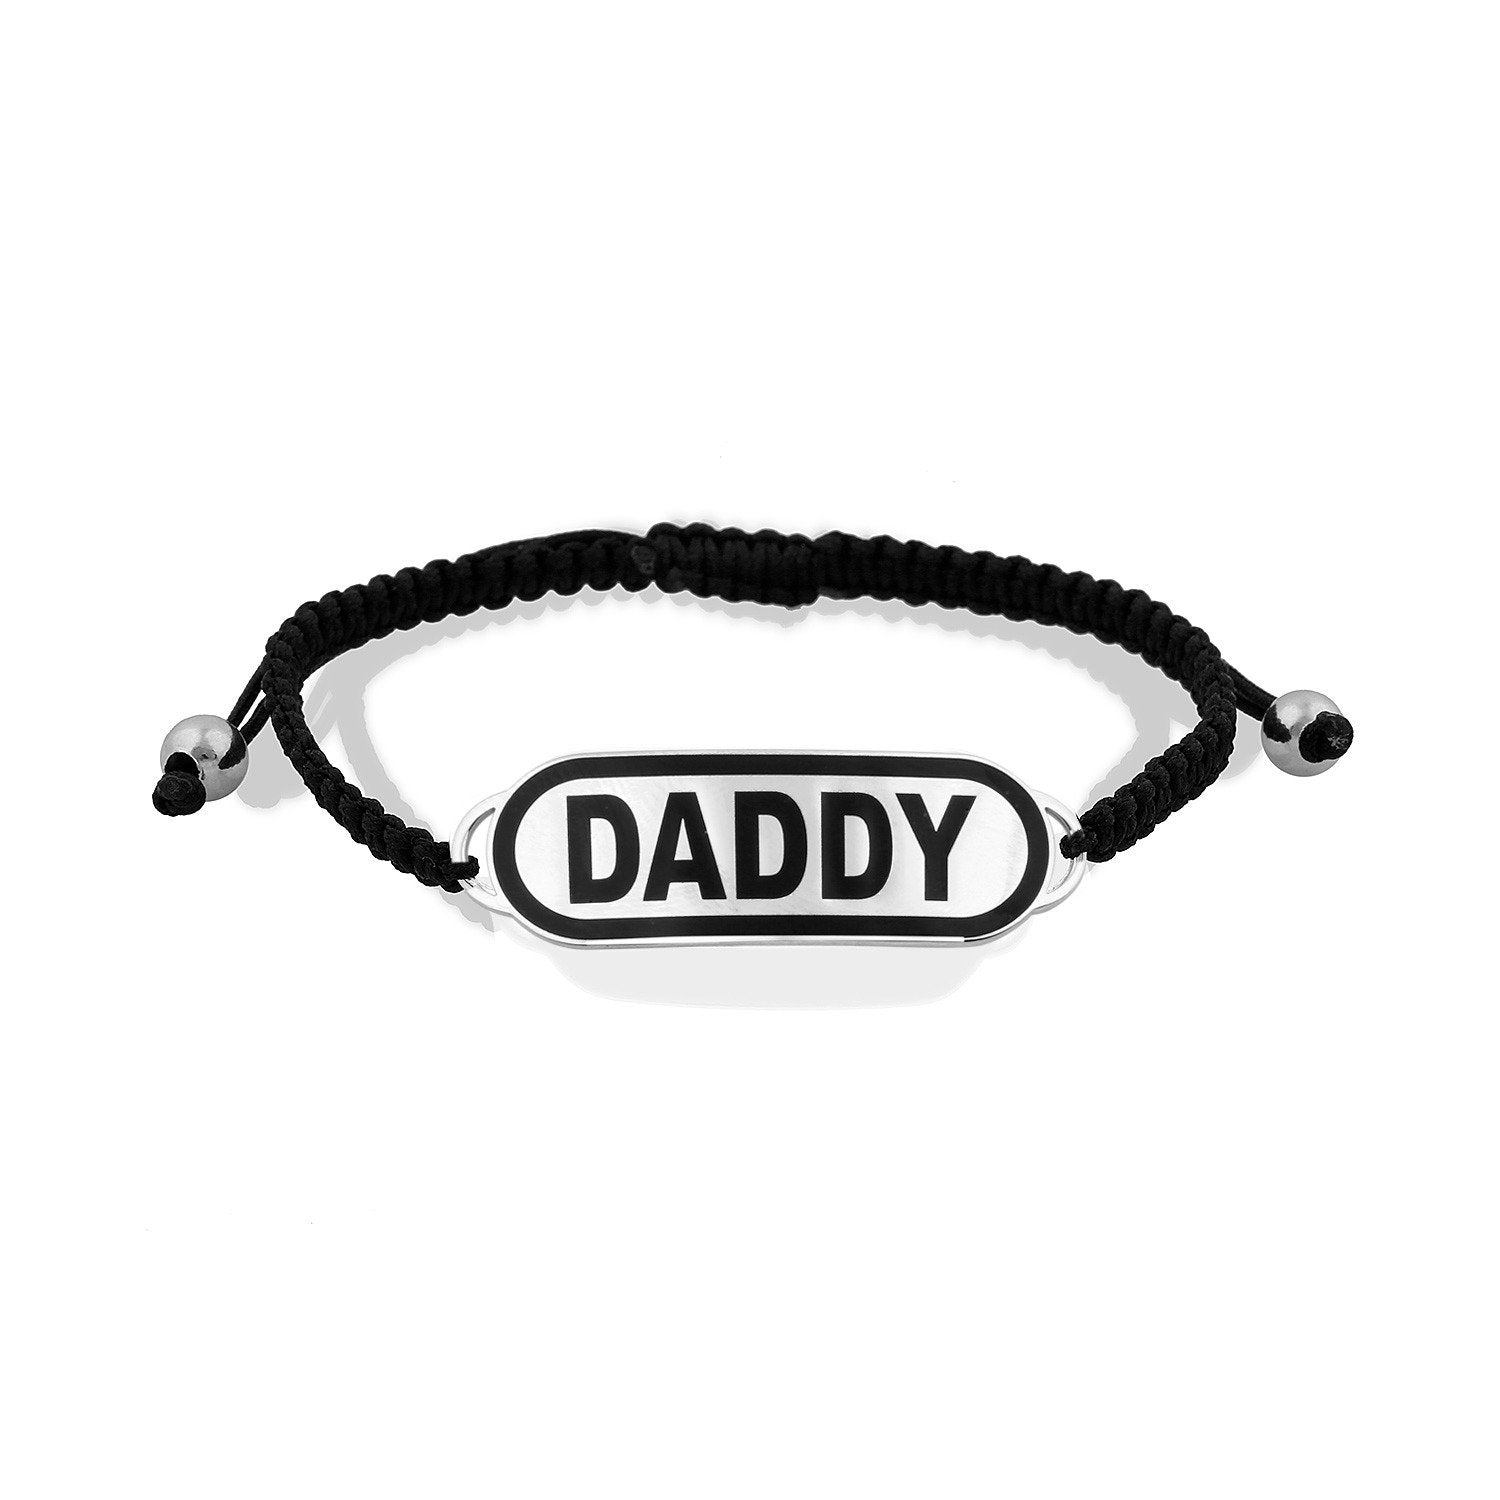 Daddy Adjustable Cord Bracelet JEWELRY The Sis Kiss